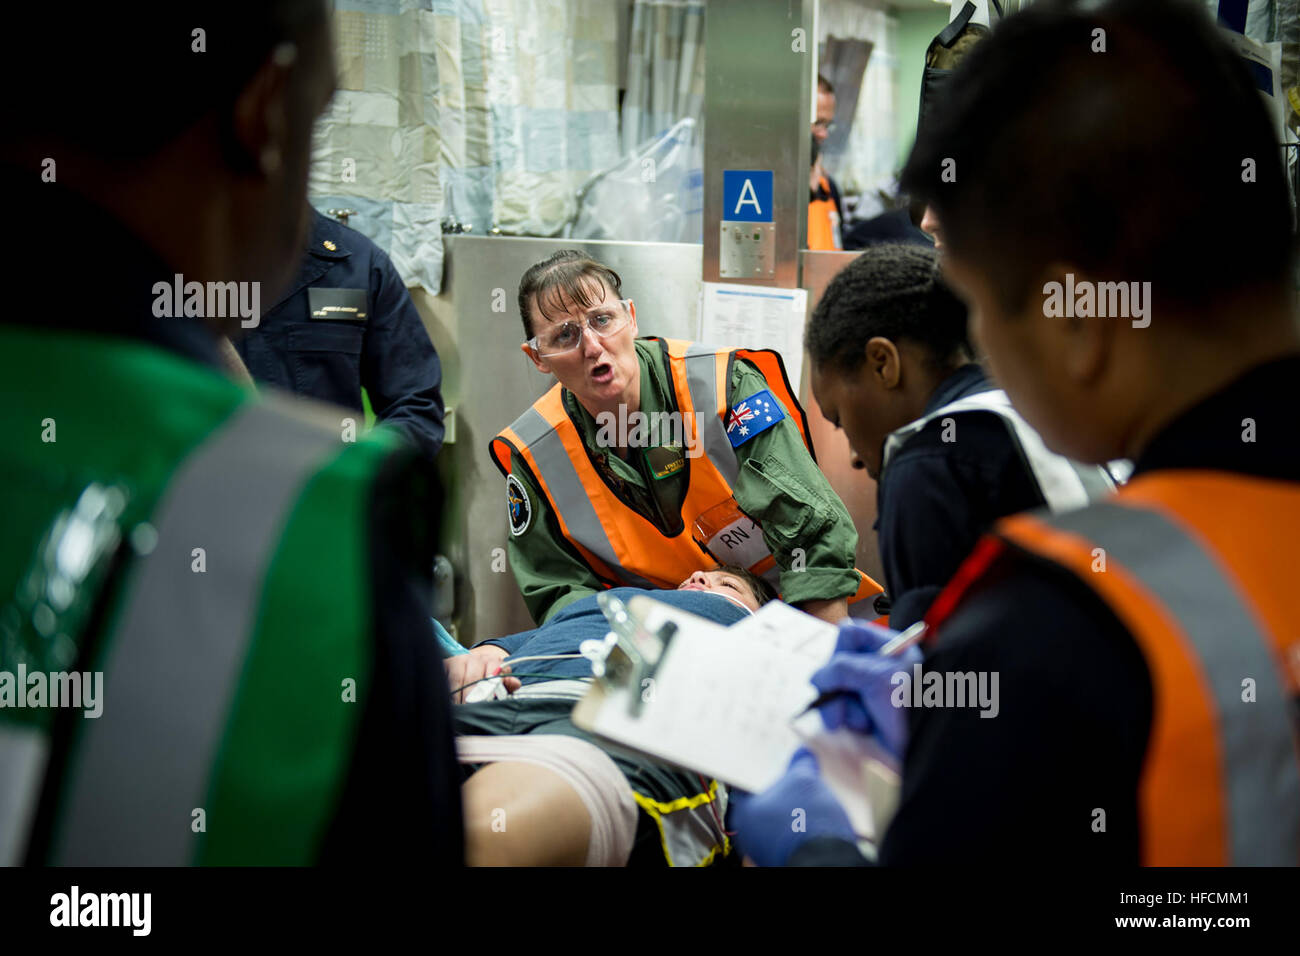 160624-N-QW941-155  PHILIPPINES SEA (June 24, 2016) Squadron Leader Lynette Howell (center), a nurse in the Royal Australian Air Force and native of Newcastle, Australia, communicates with personnel aboard hospital ship USNS Mercy (T-AH 19) during a mass casualty drill. Deployed in support of Pacific Partnership 2016, medical, engineering and various other personnel embarked aboard Mercy are working side-by-side with partner nation counterparts, exchanging ideas, building best practices and relationships to ensure preparedness should disaster strike. (U.S. Navy photo by Mass Communication Spec Stock Photo